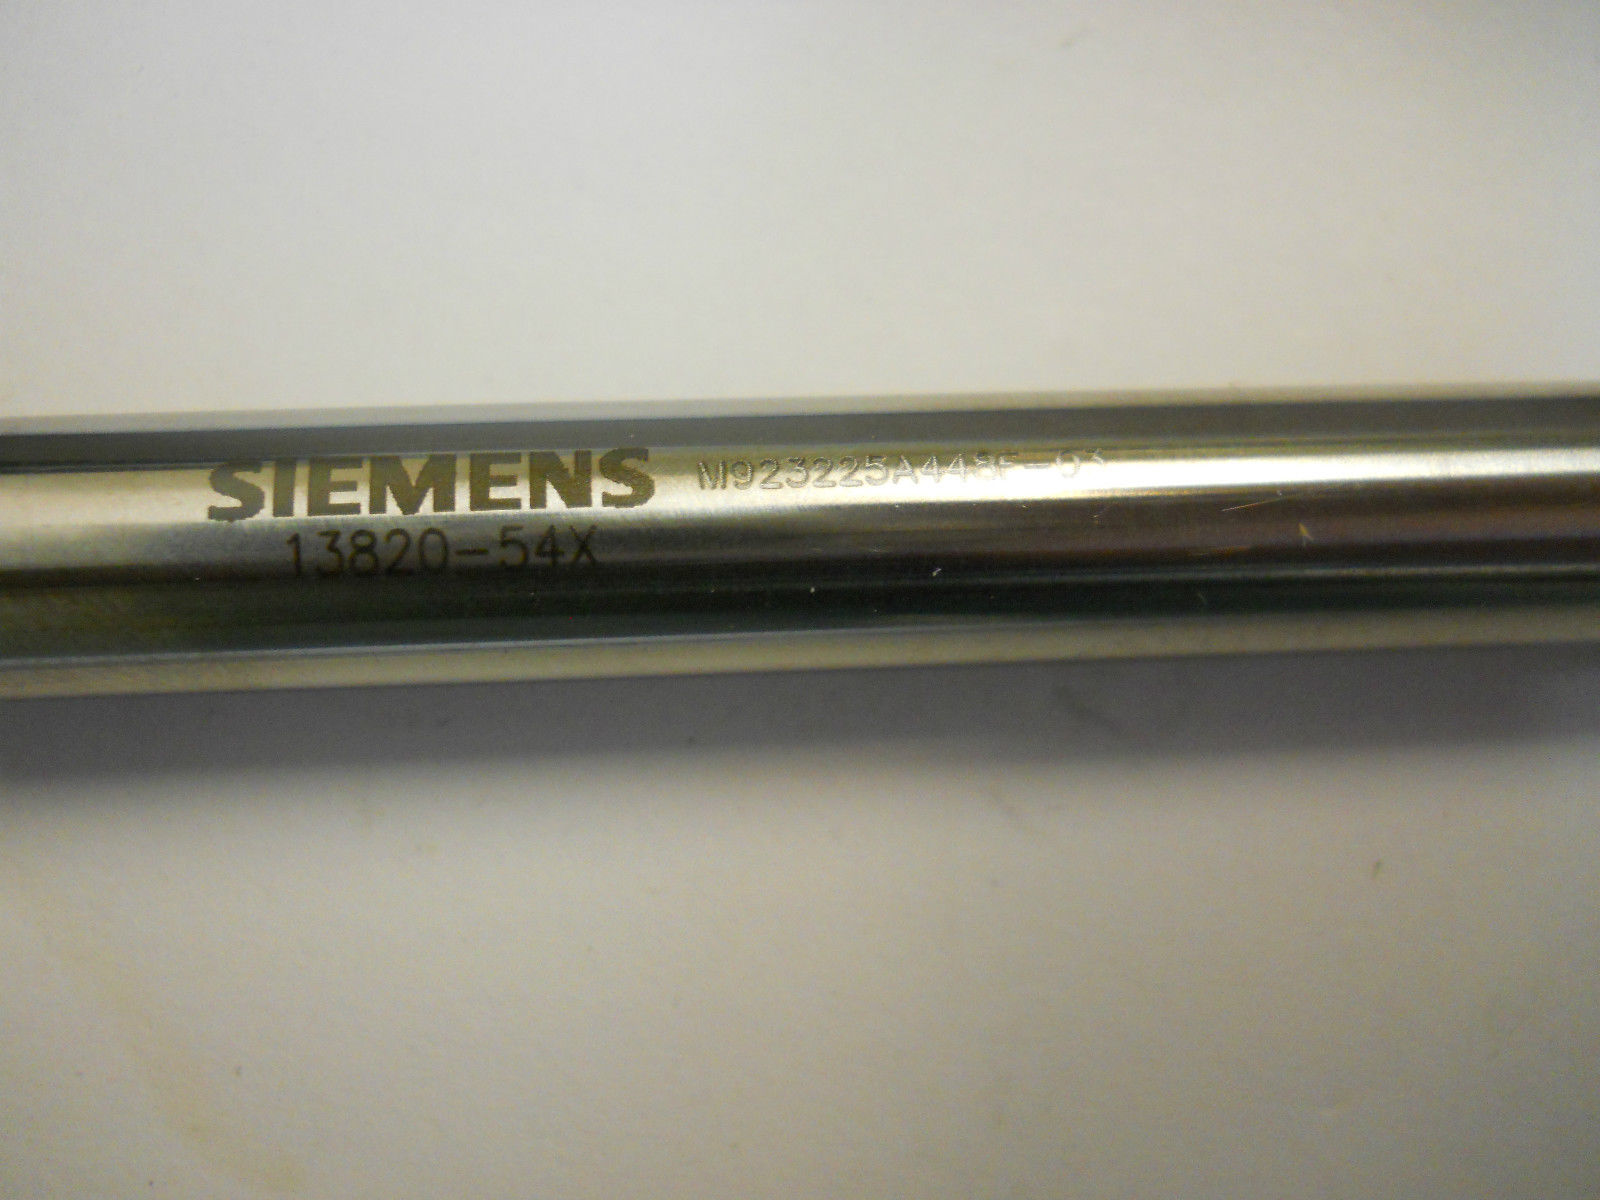 SIEMENS 13820-54X LINEAR TRANSDUCER PROBE M923225A448F  NEW CONDITION IN BOX DIAGNOSTIC ULTRASOUND MACHINES FOR SALE